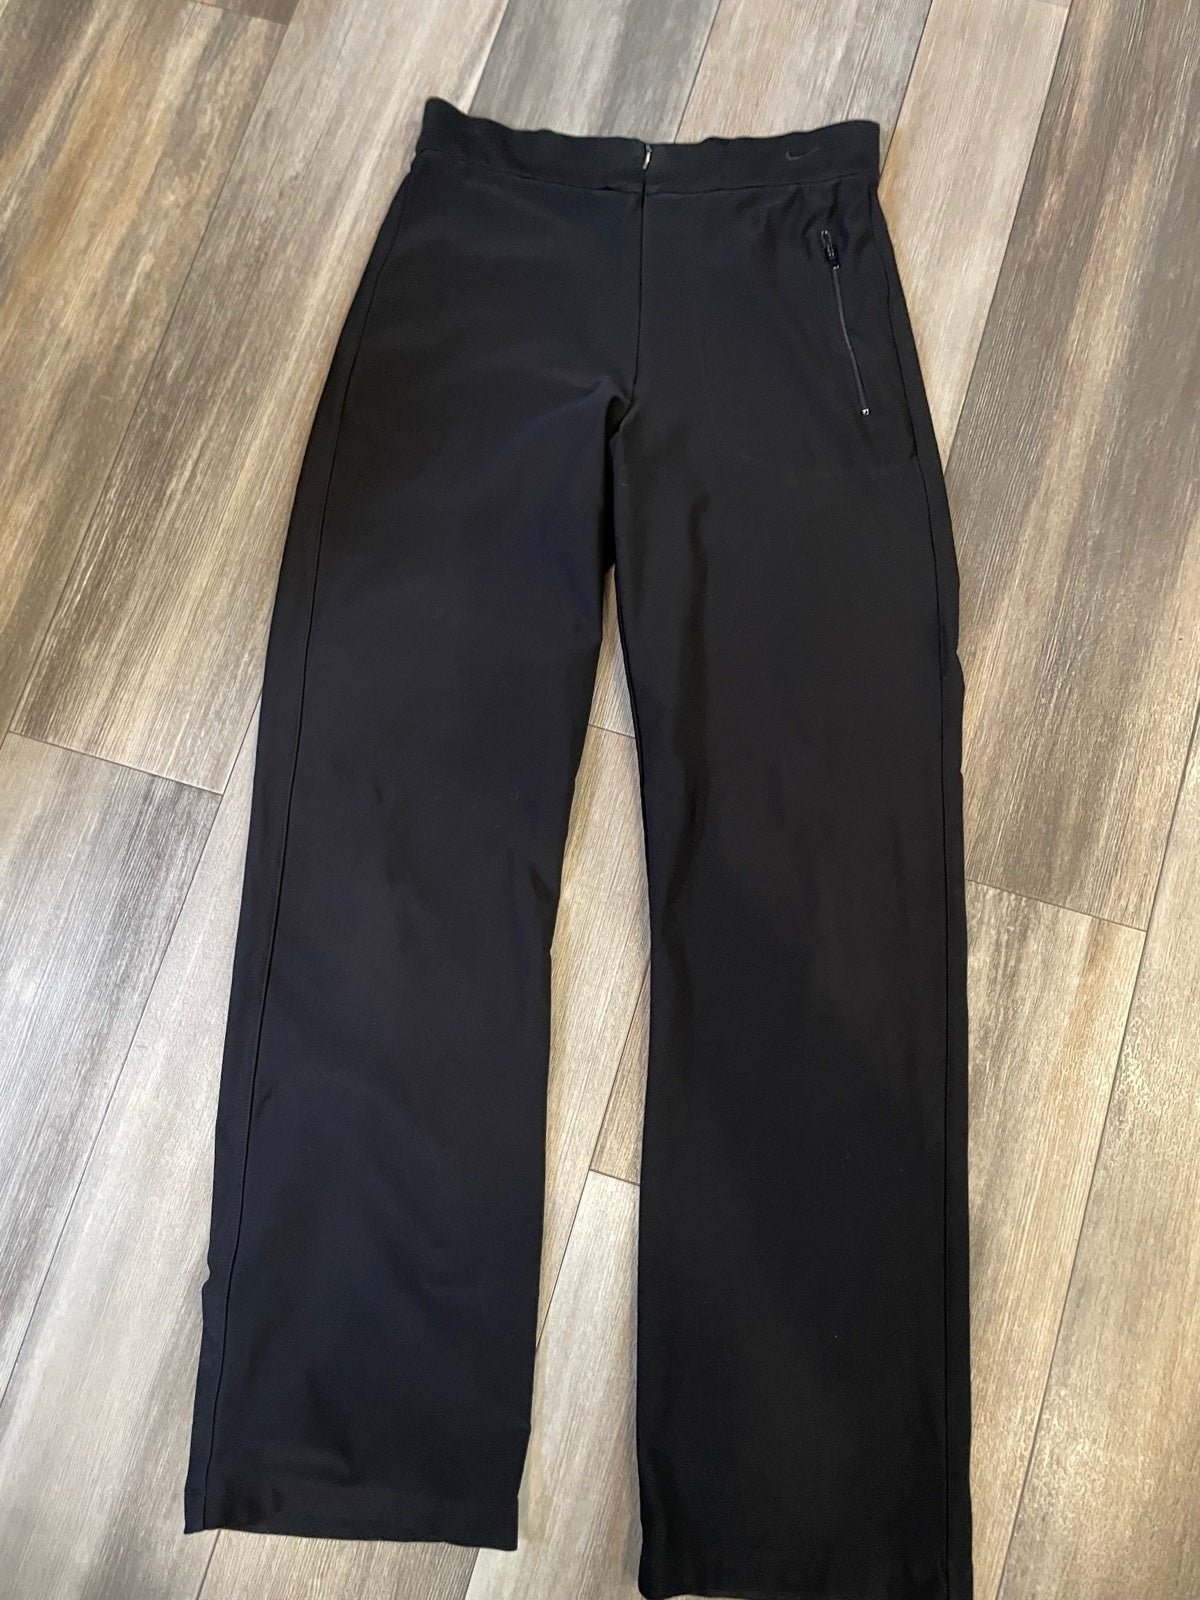 Factory Direct  Nike black womens pants jdqV6K0Md Factory Price